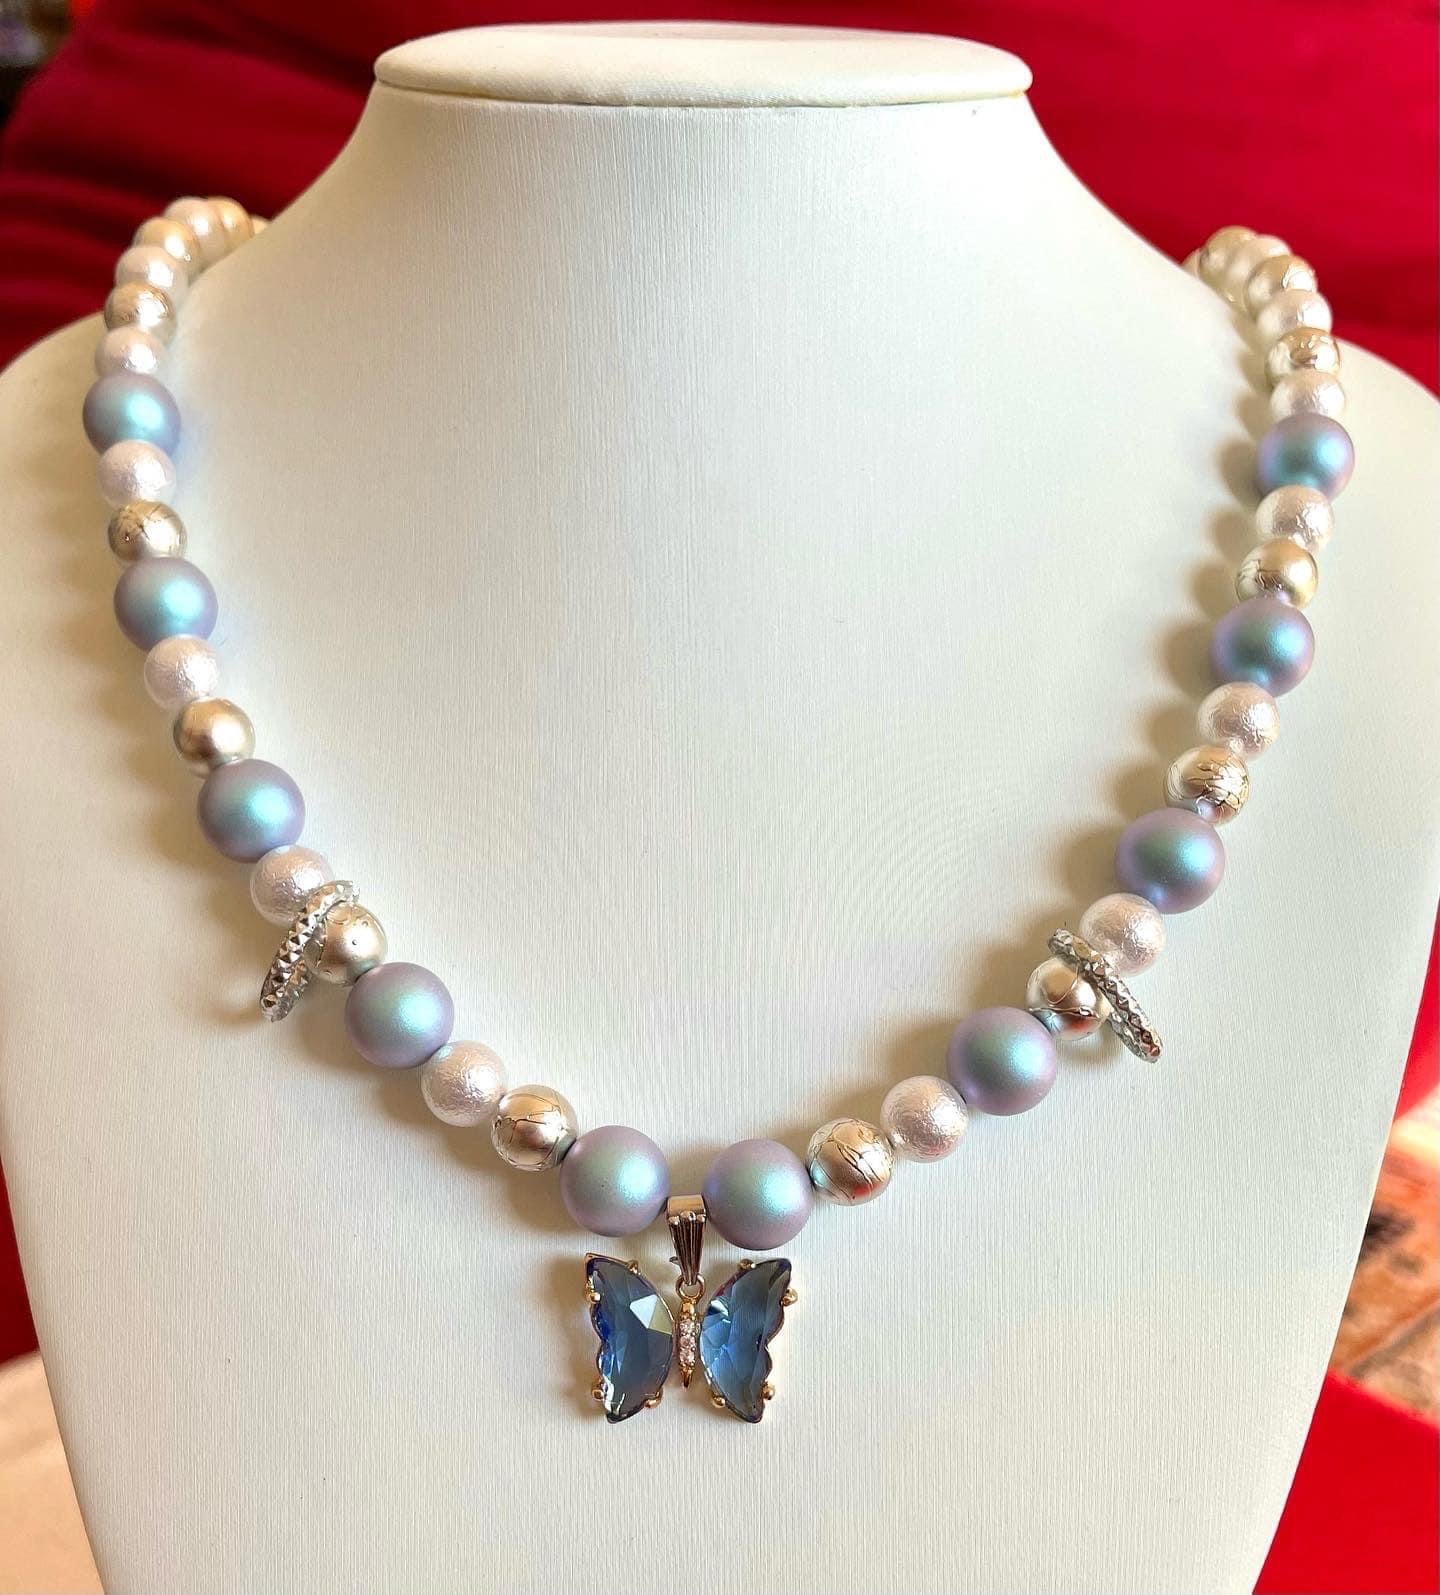 Handmade pearls beads necklace